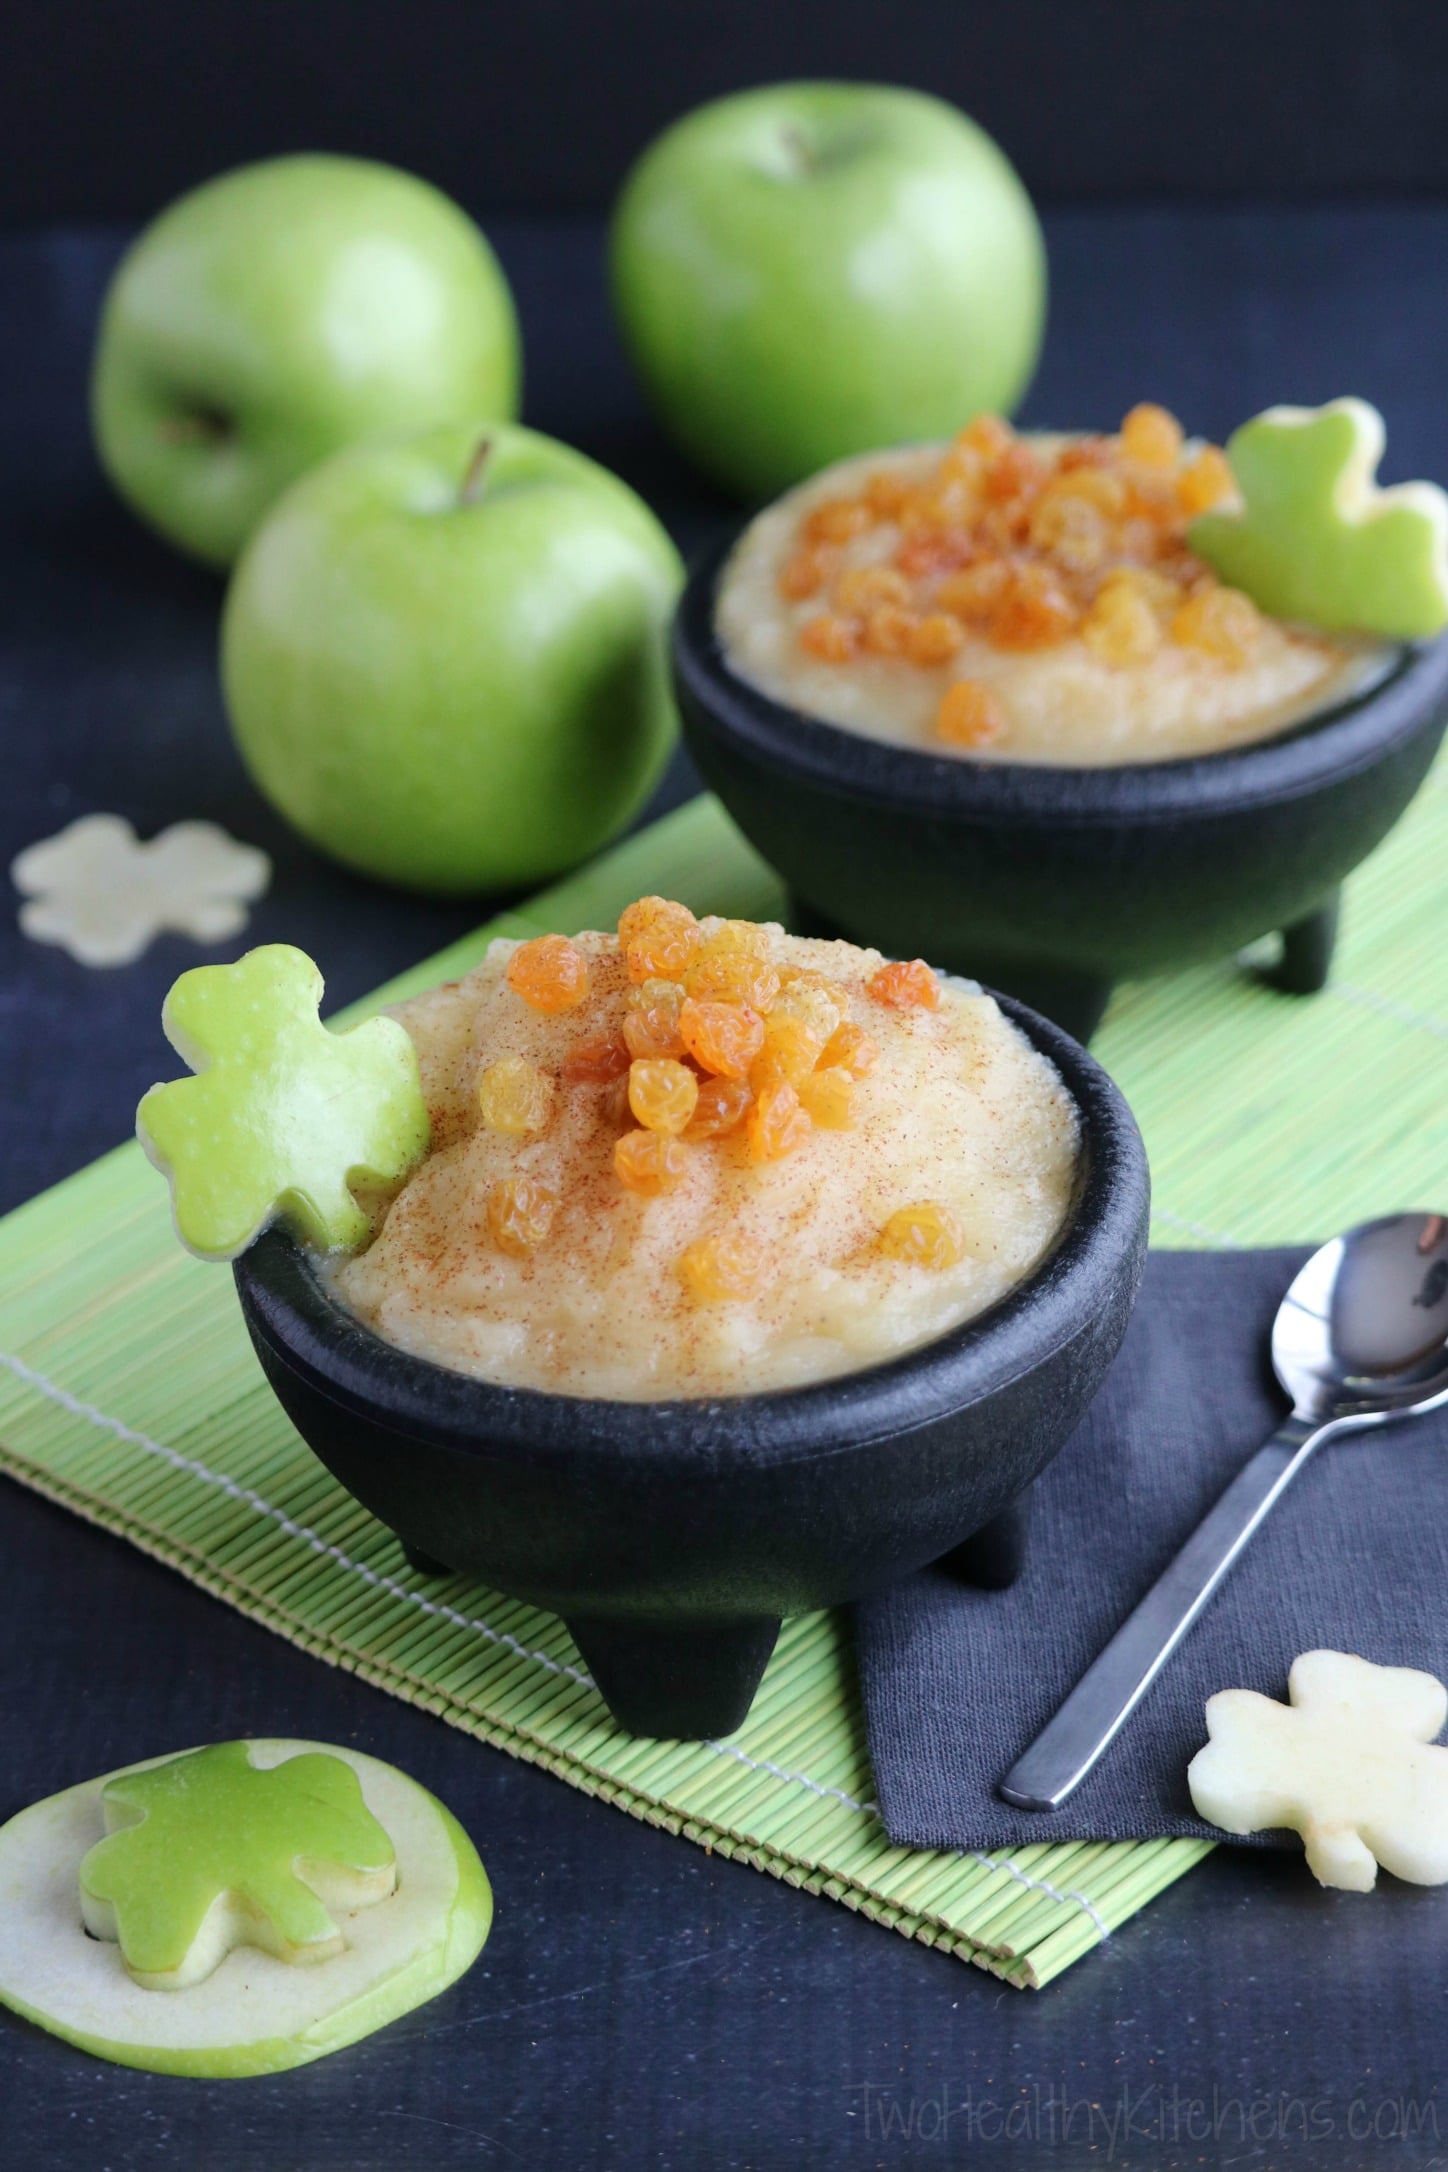 This Naturally Sweetened Pot o' Gold Applesauce is such a fun St. Patrick’s Day snack! Quick, easy – and so healthy, too! With natural sweetness from a surprising (golden!) mix-in, your kids will love the luck-o-the-Irish twist, and you’ll love all the great nutrition! | www.TwoHealthyKitchens.com